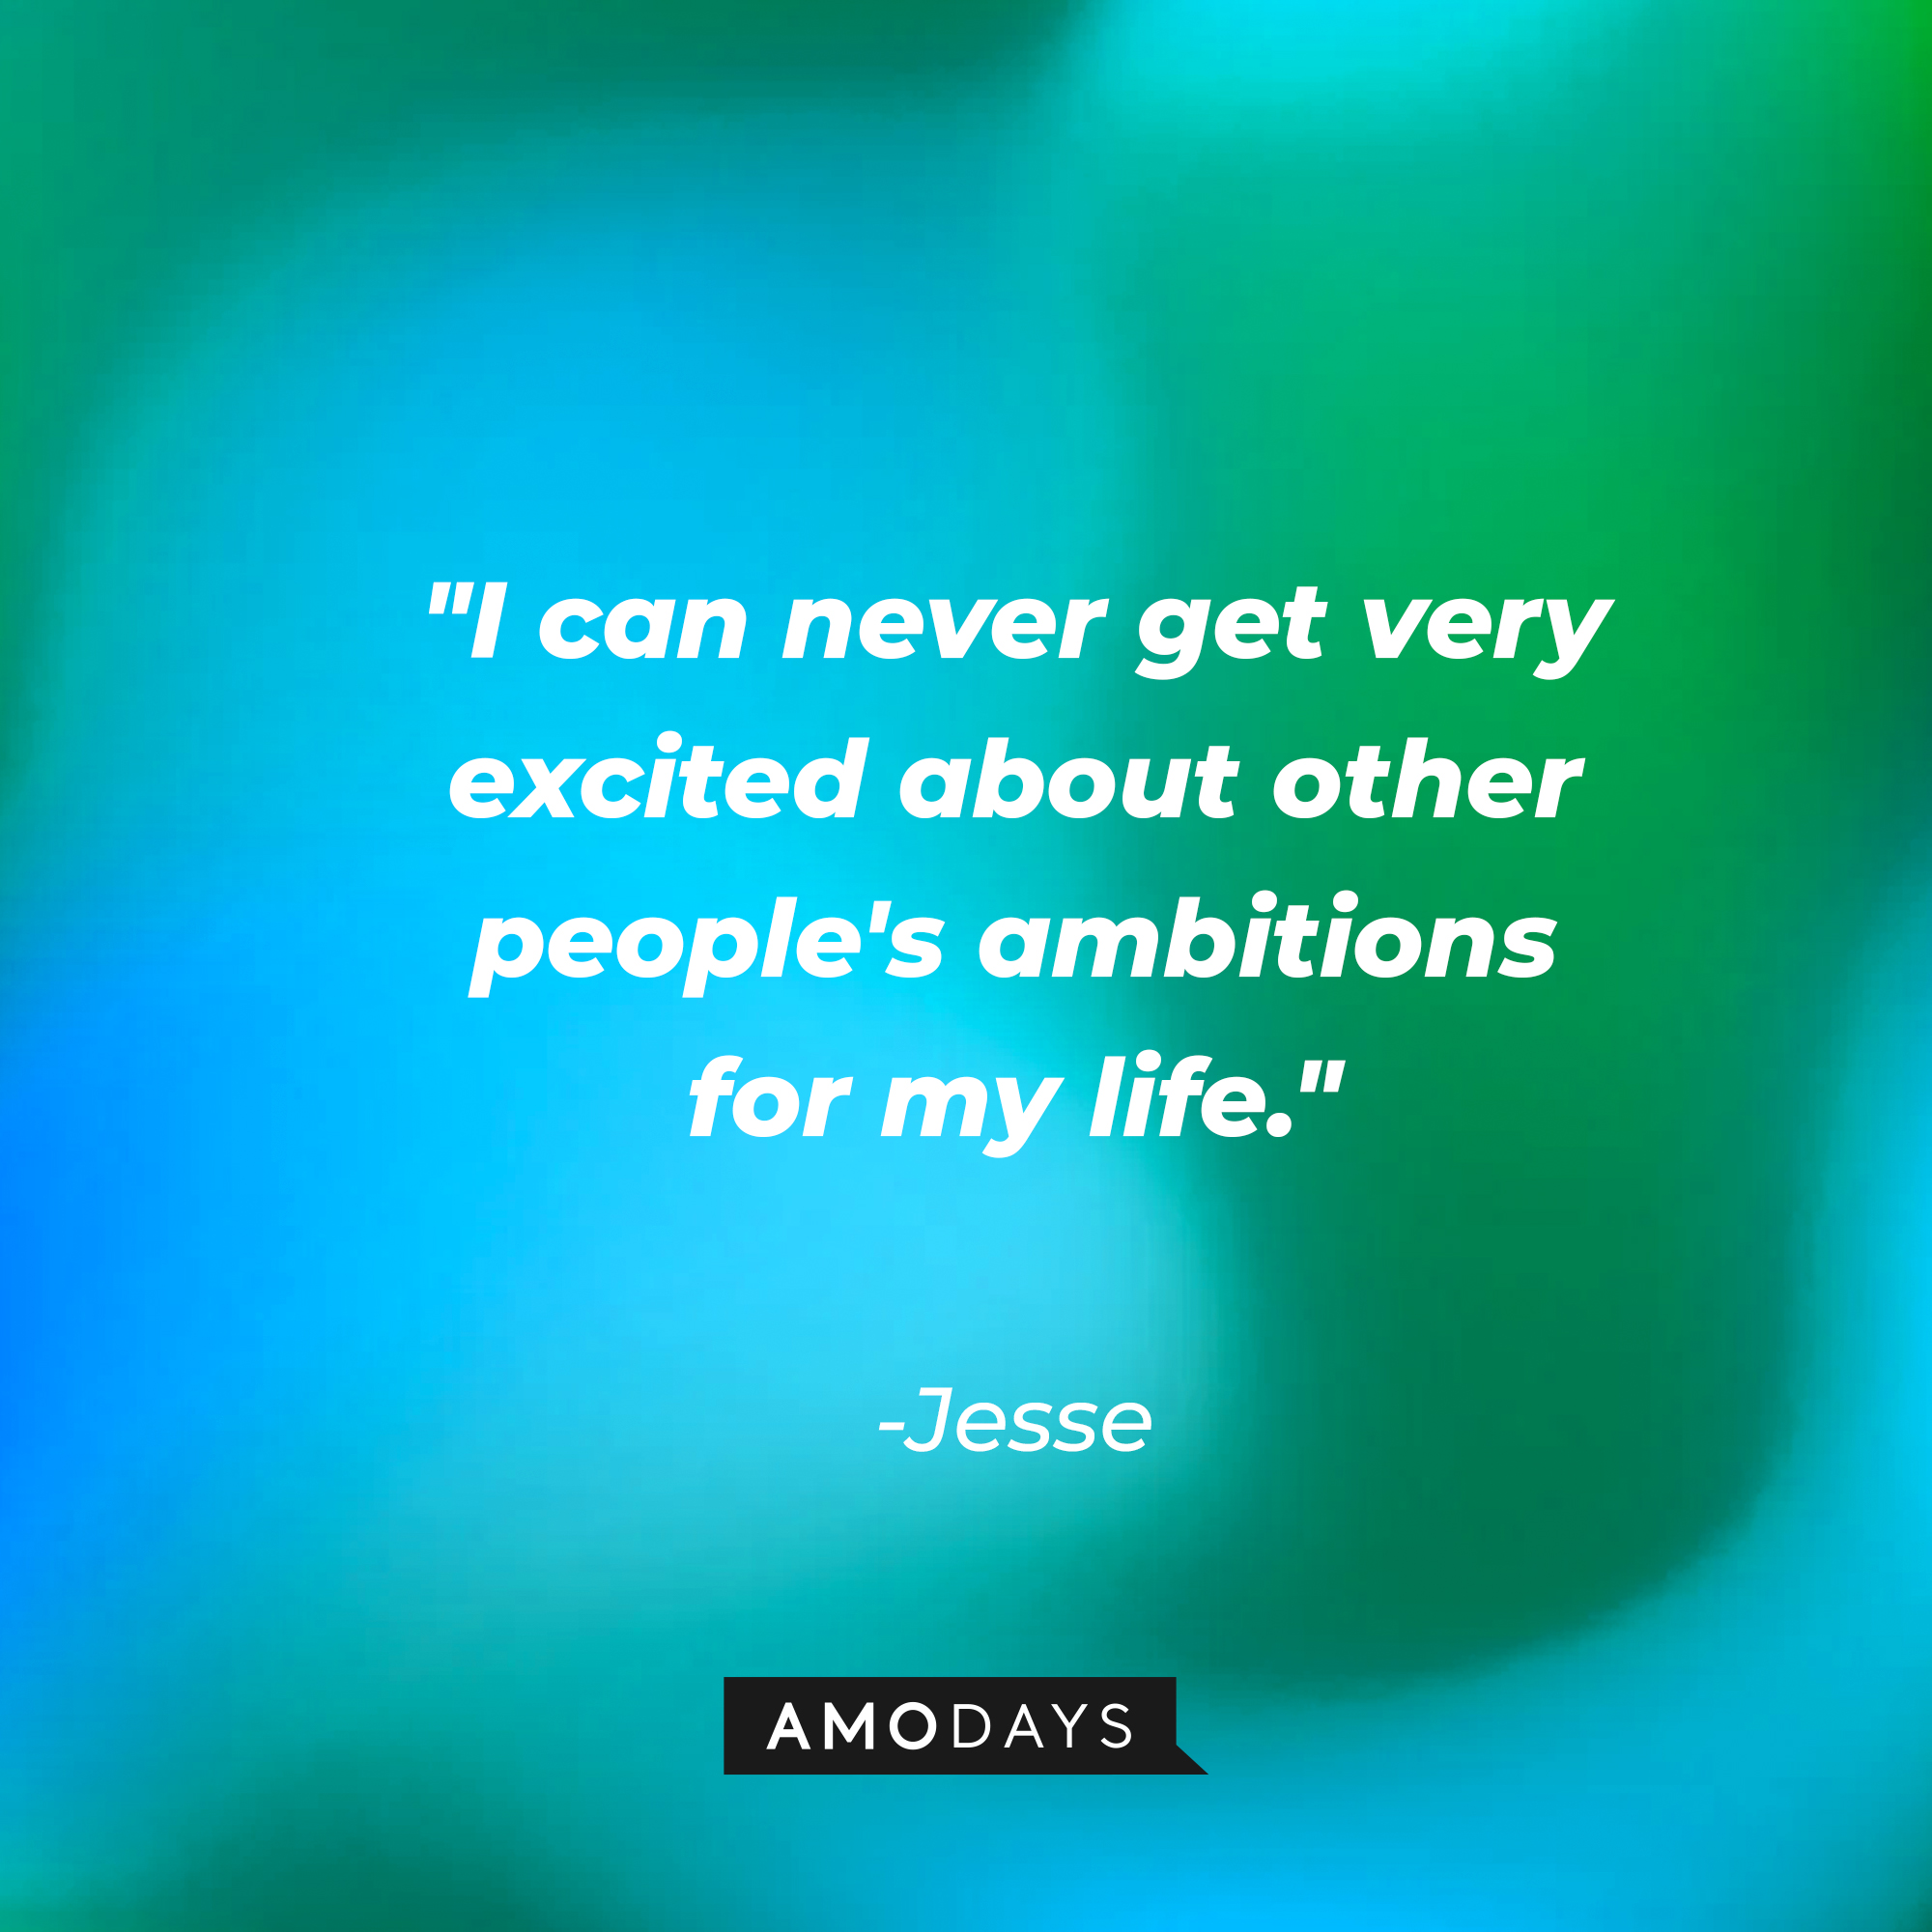 Jesse's quote: "I can never get very excited about other people's ambitions for my life." | Source: AmoDays